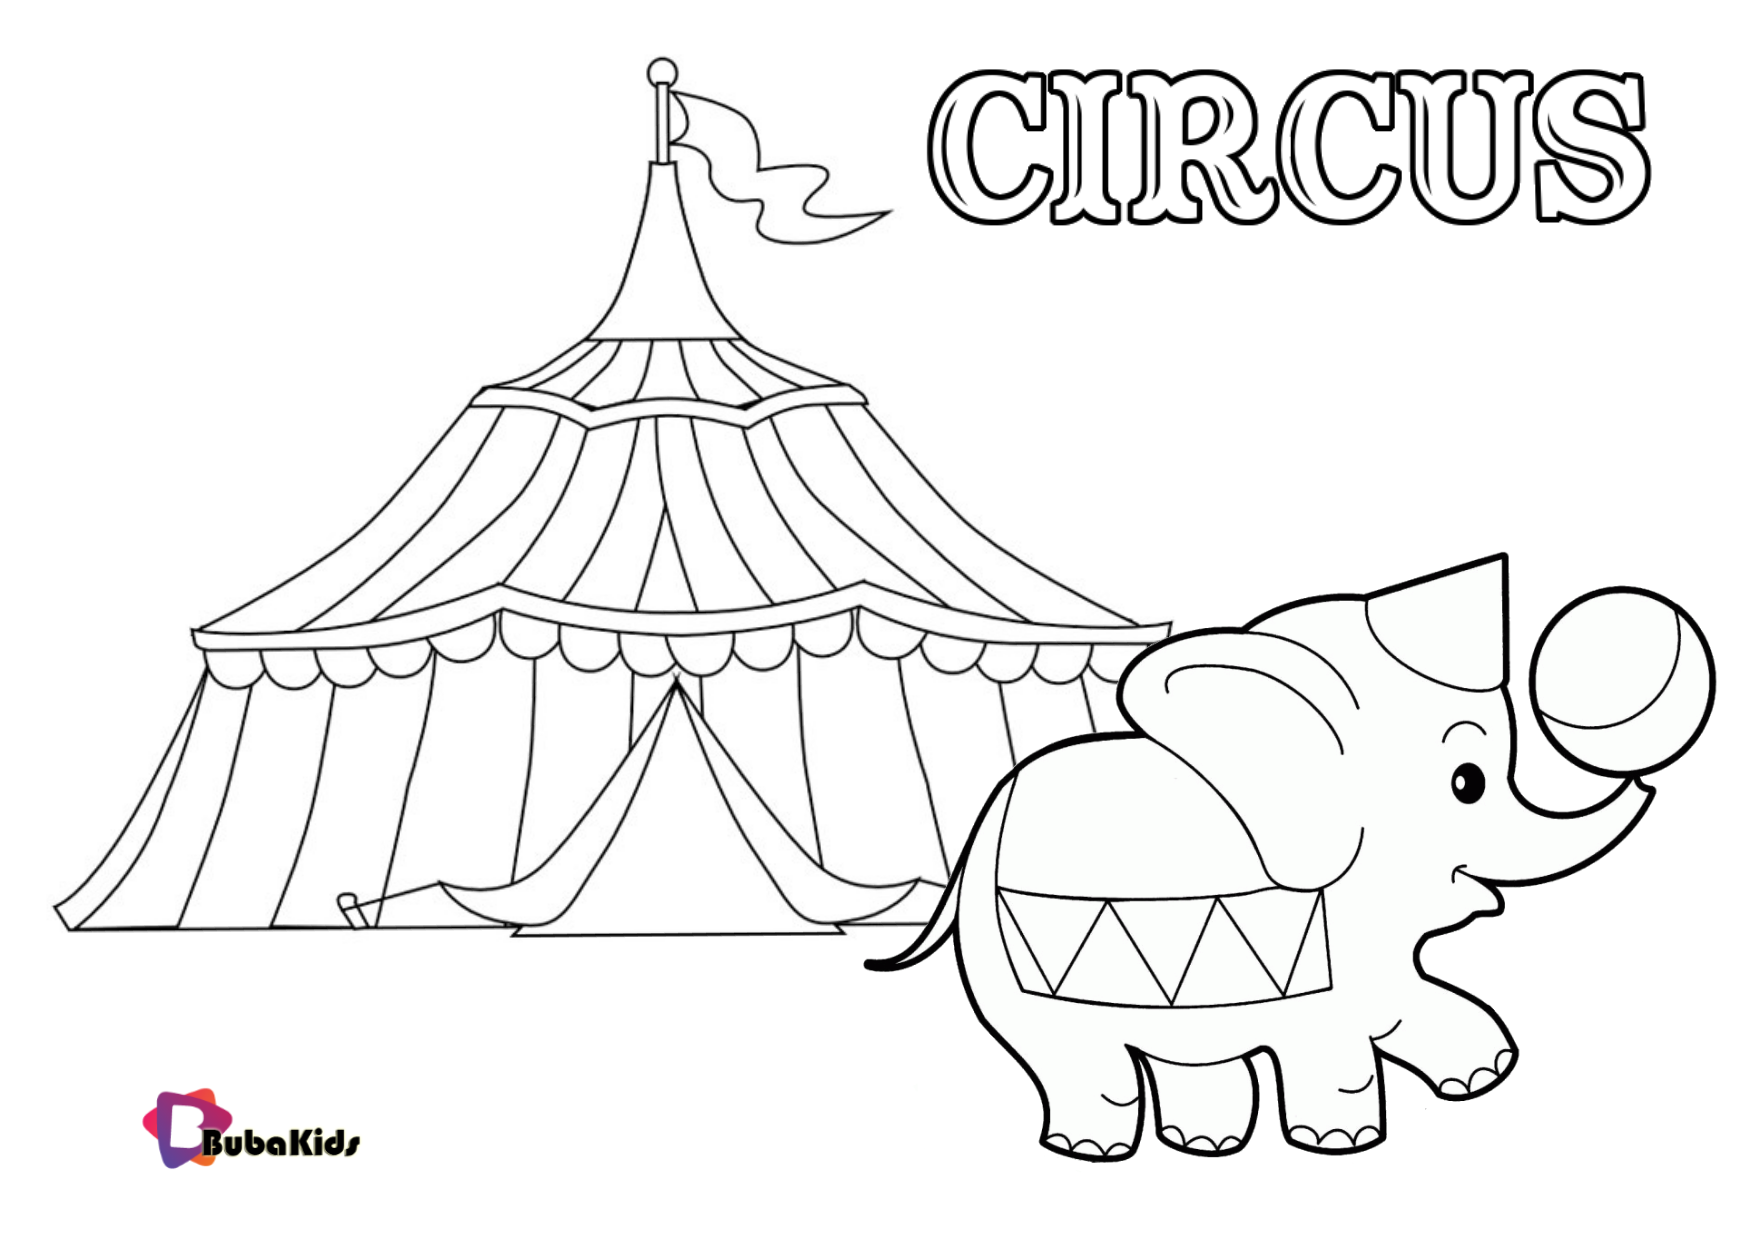 Circus tent and elephant easy and simple coloring page for preschool Wallpaper